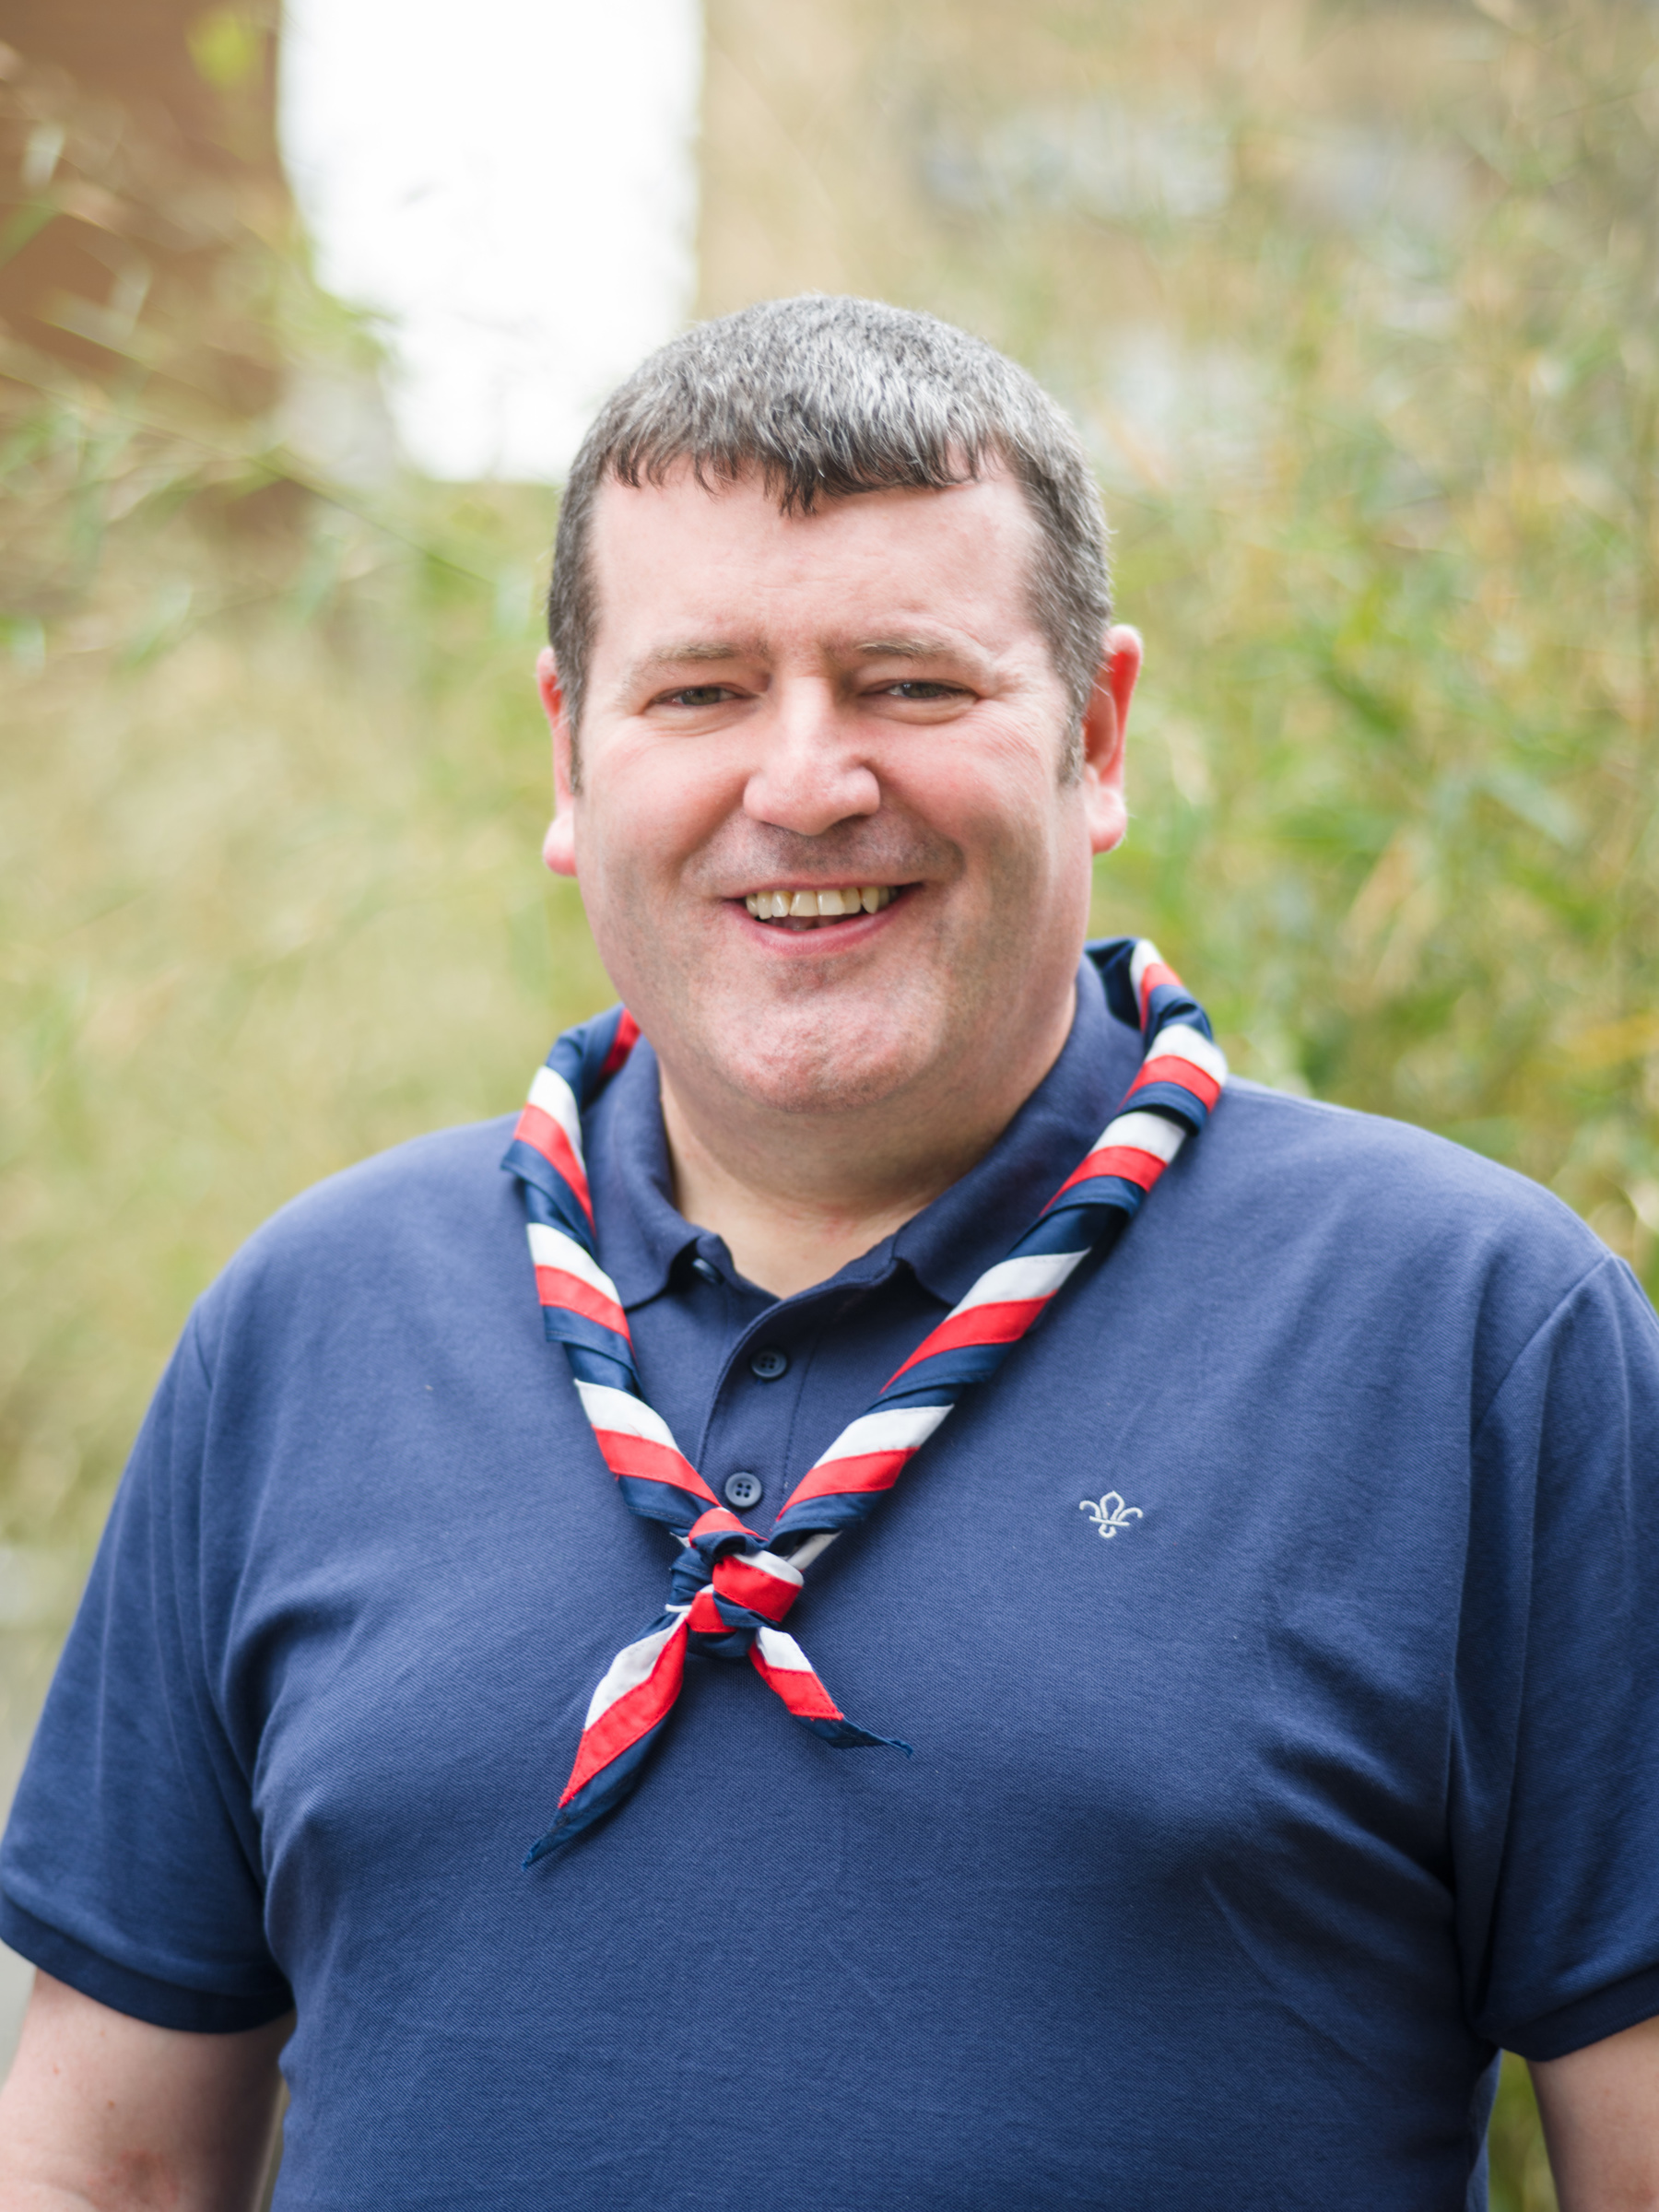 Chief Commissioner of Scotland, Andrew Sharkey in a navy polo wearing a UK necker